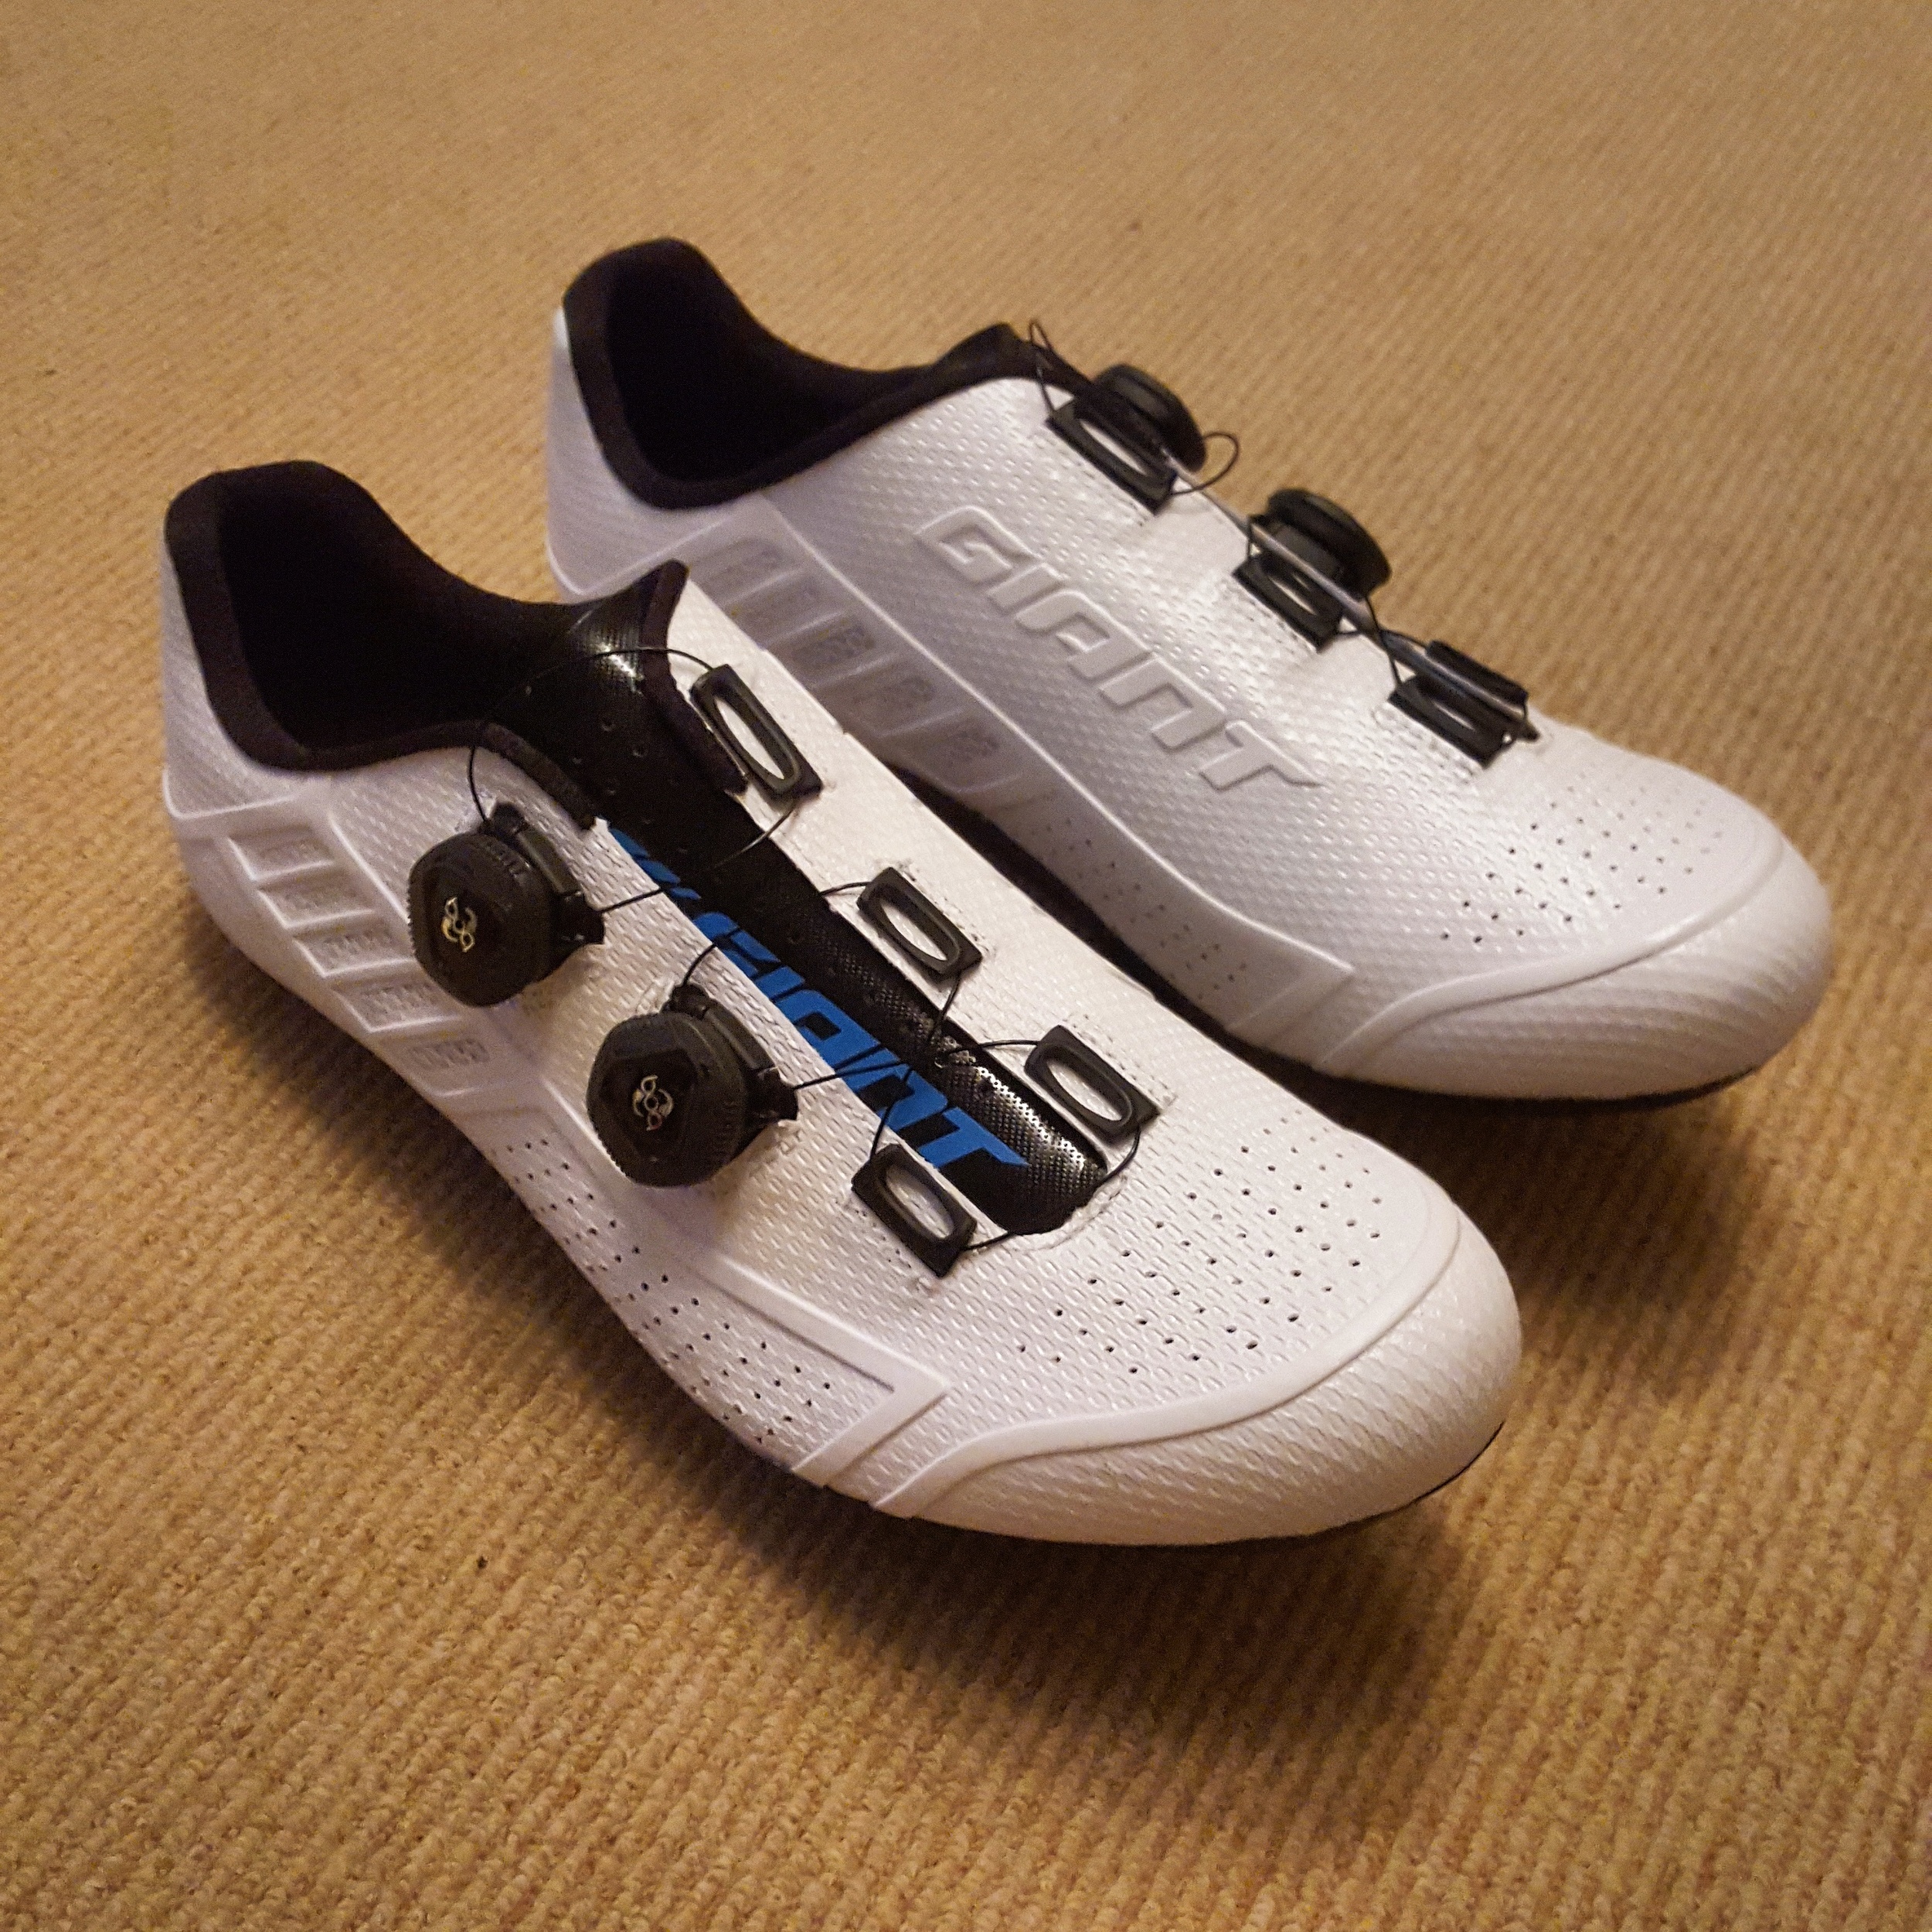 giant cycling shoes